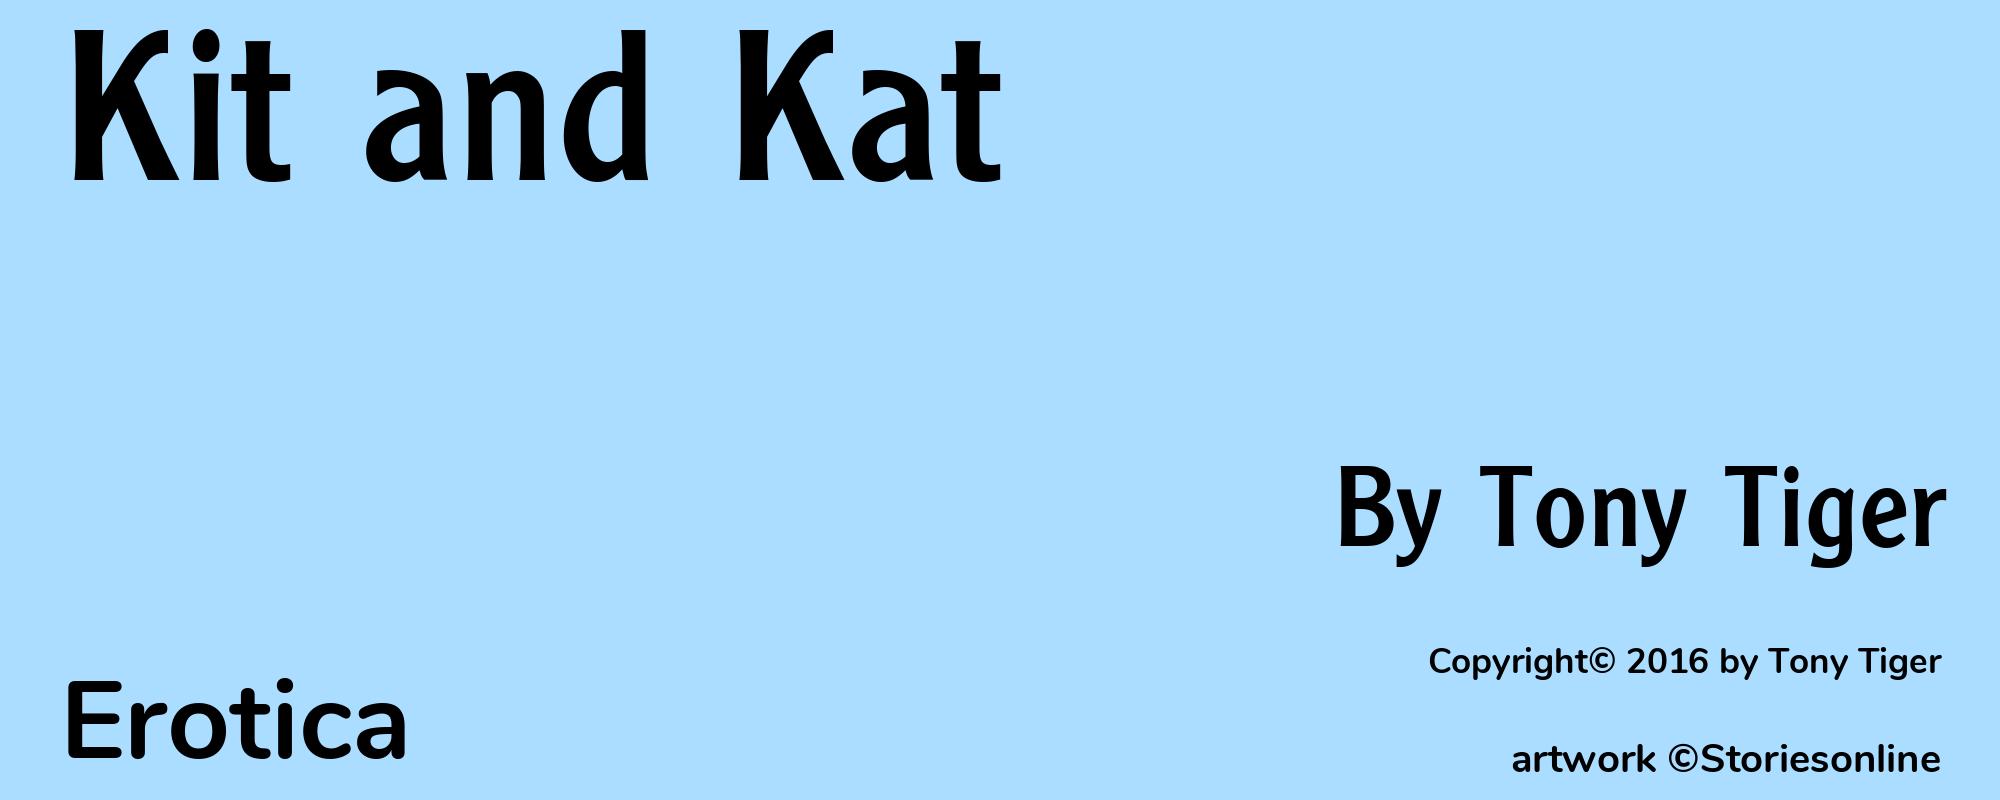 Kit and Kat - Cover